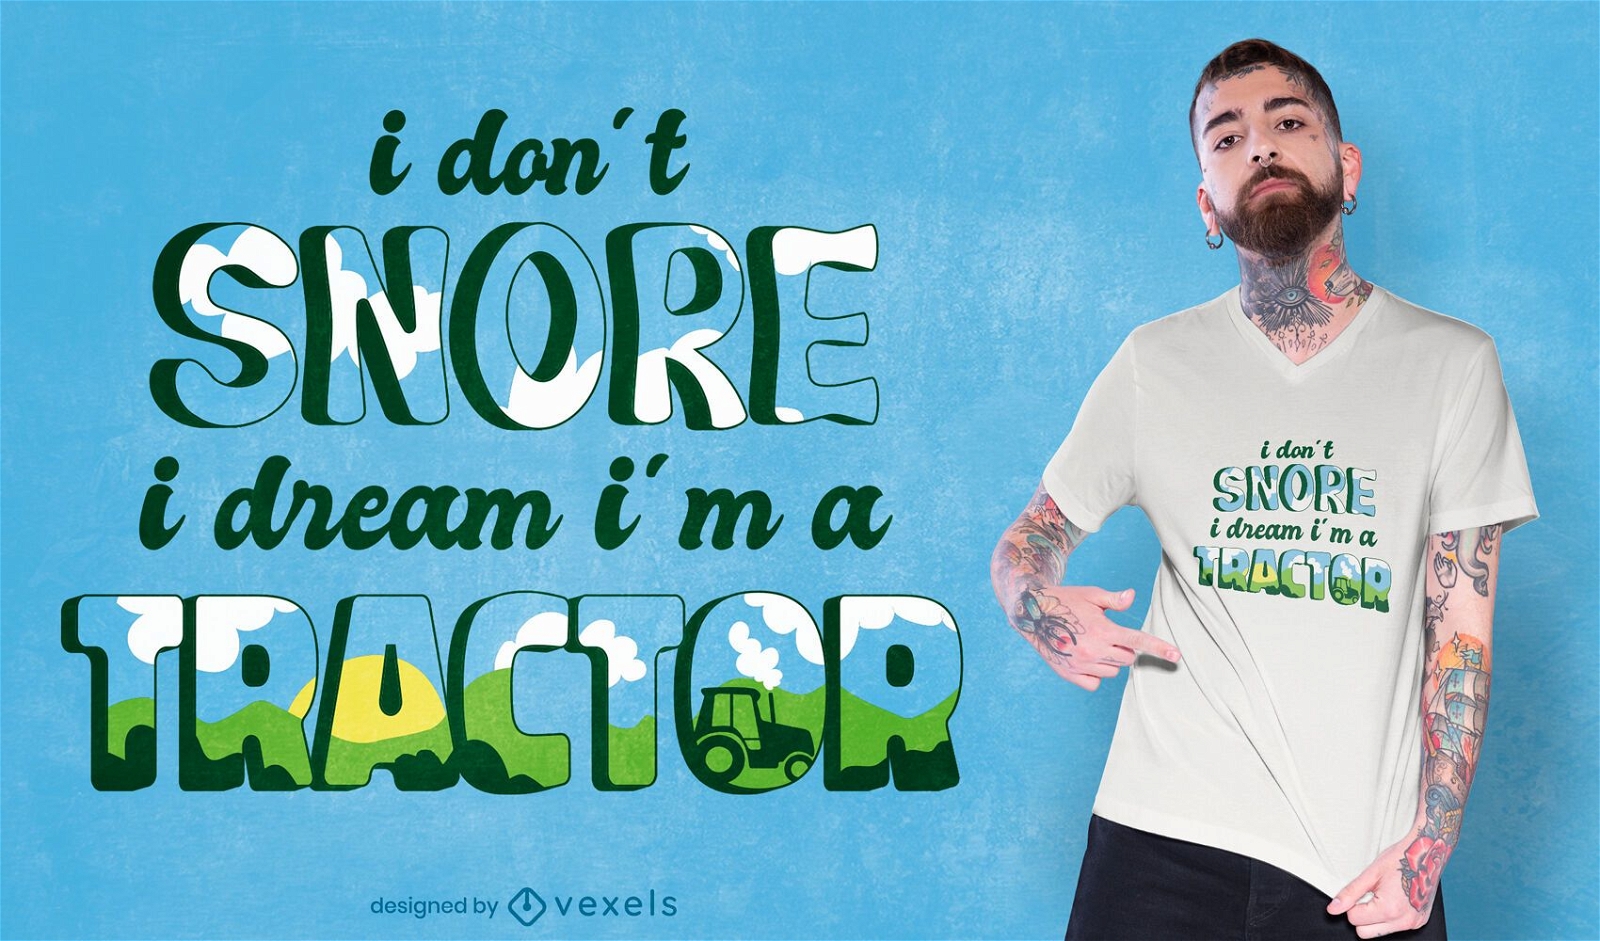 Snoring funny quote t-shirt design